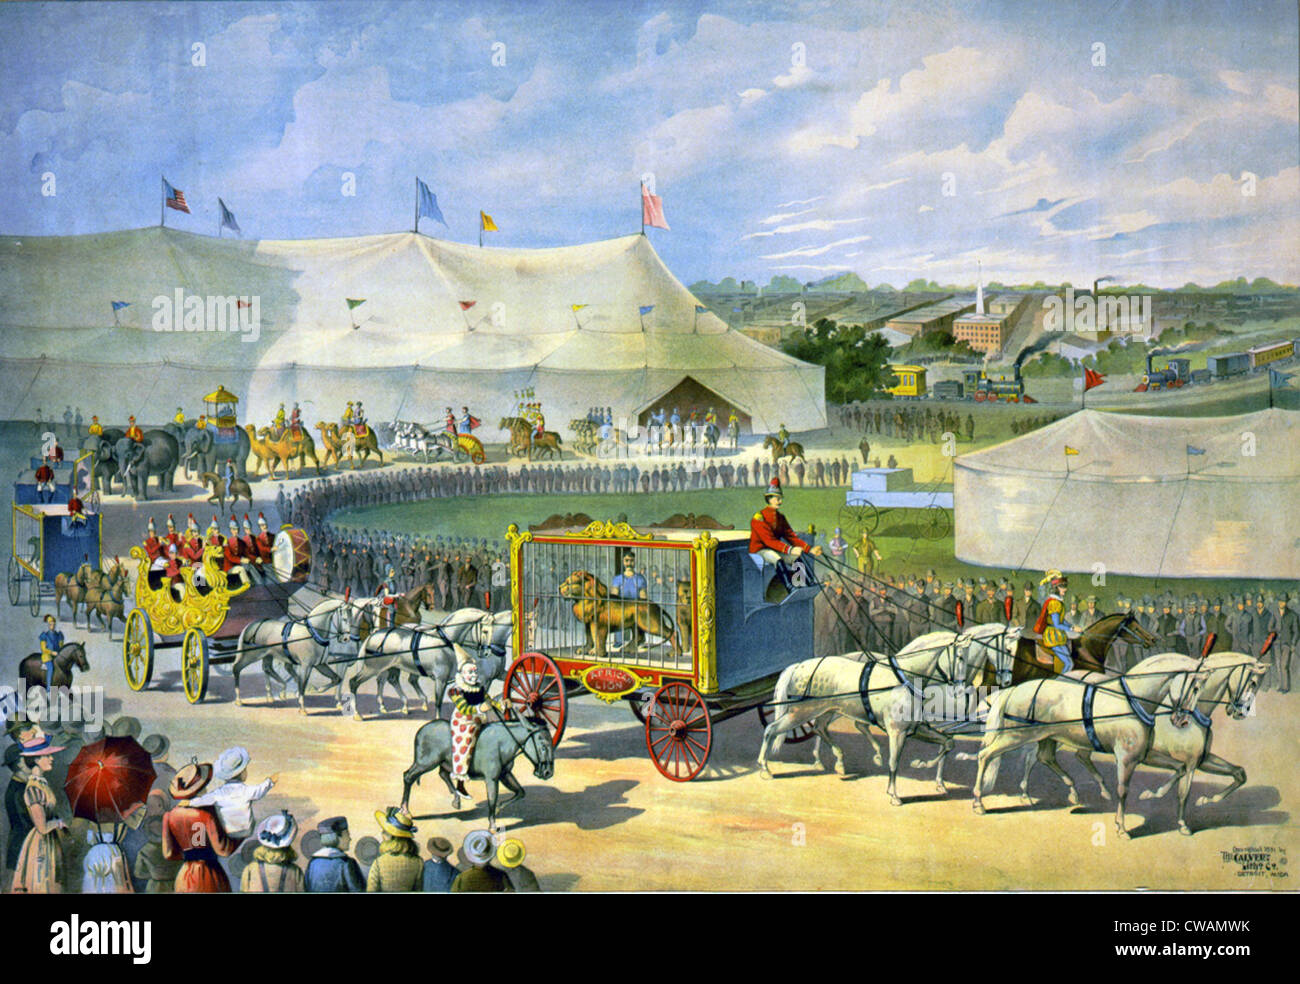 Poster of American circus parade with a caged lion, clowns, elephants, Roman chariots, and camels, with circus tent dominating Stock Photo